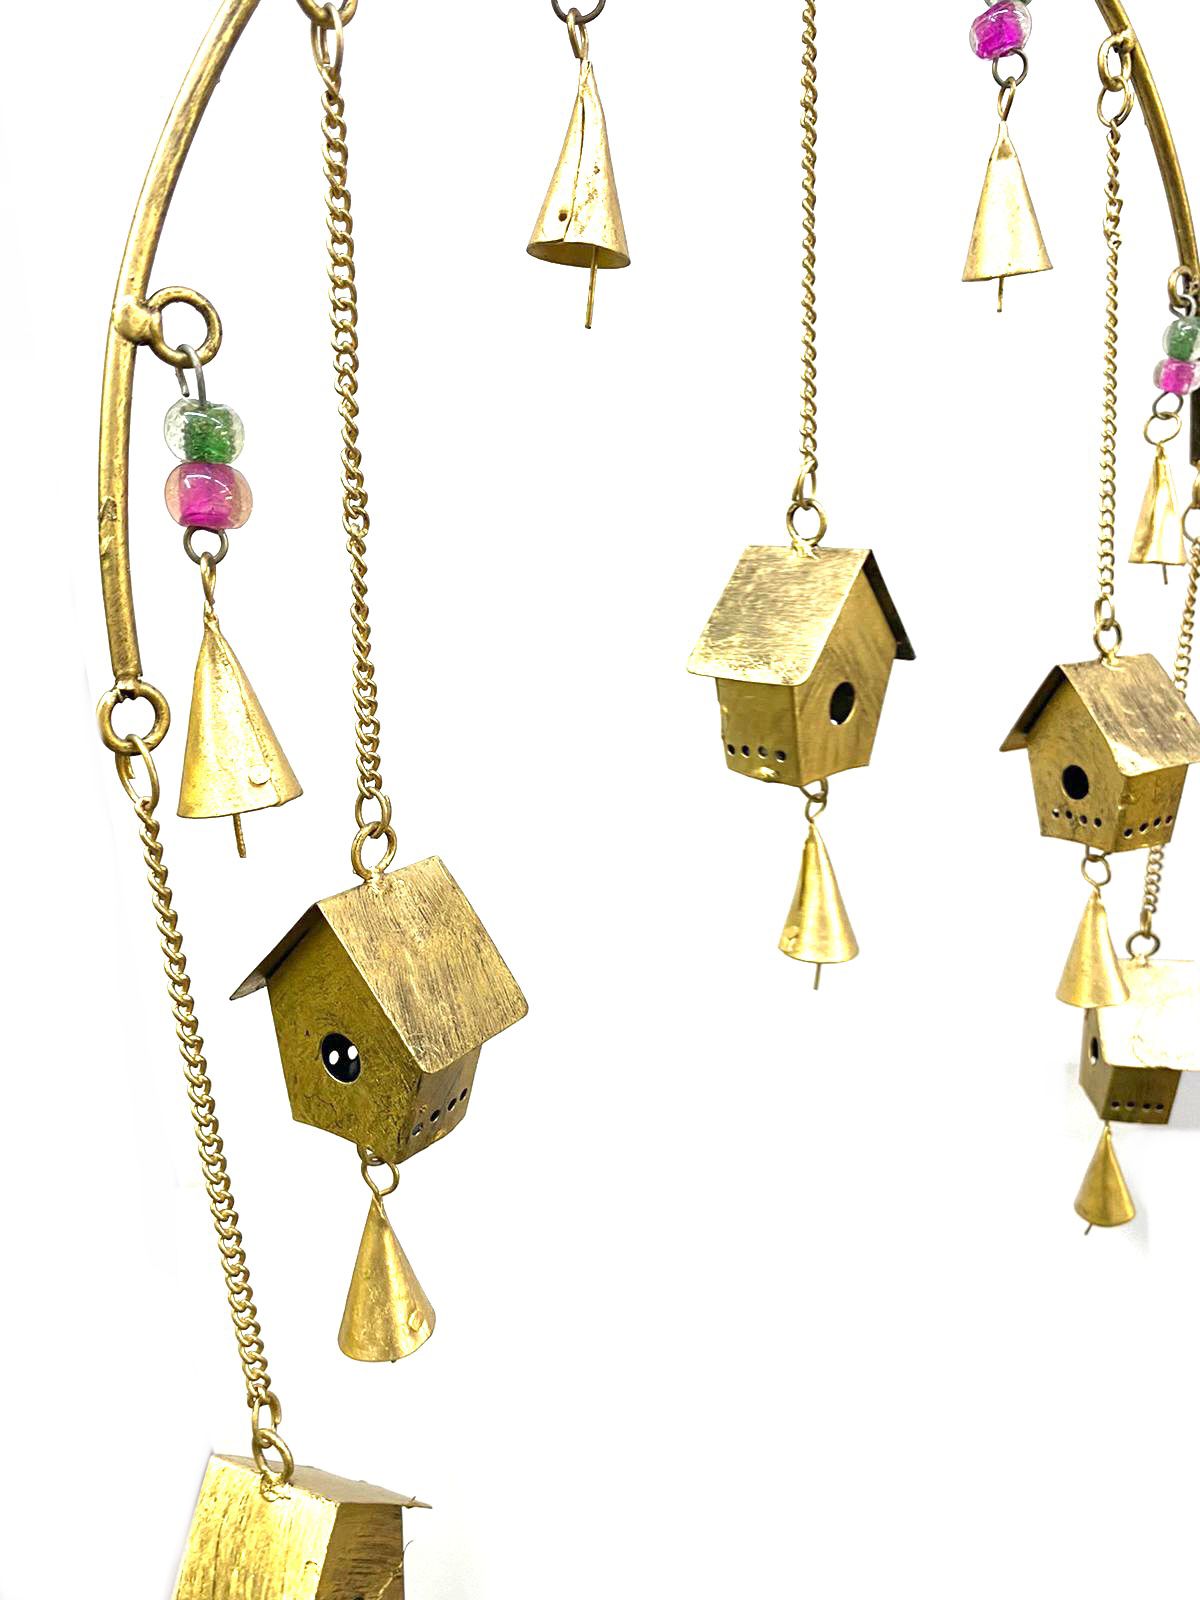 Designer Hangings Decorative Chimes Home & Garden Collection From Tamrapatra